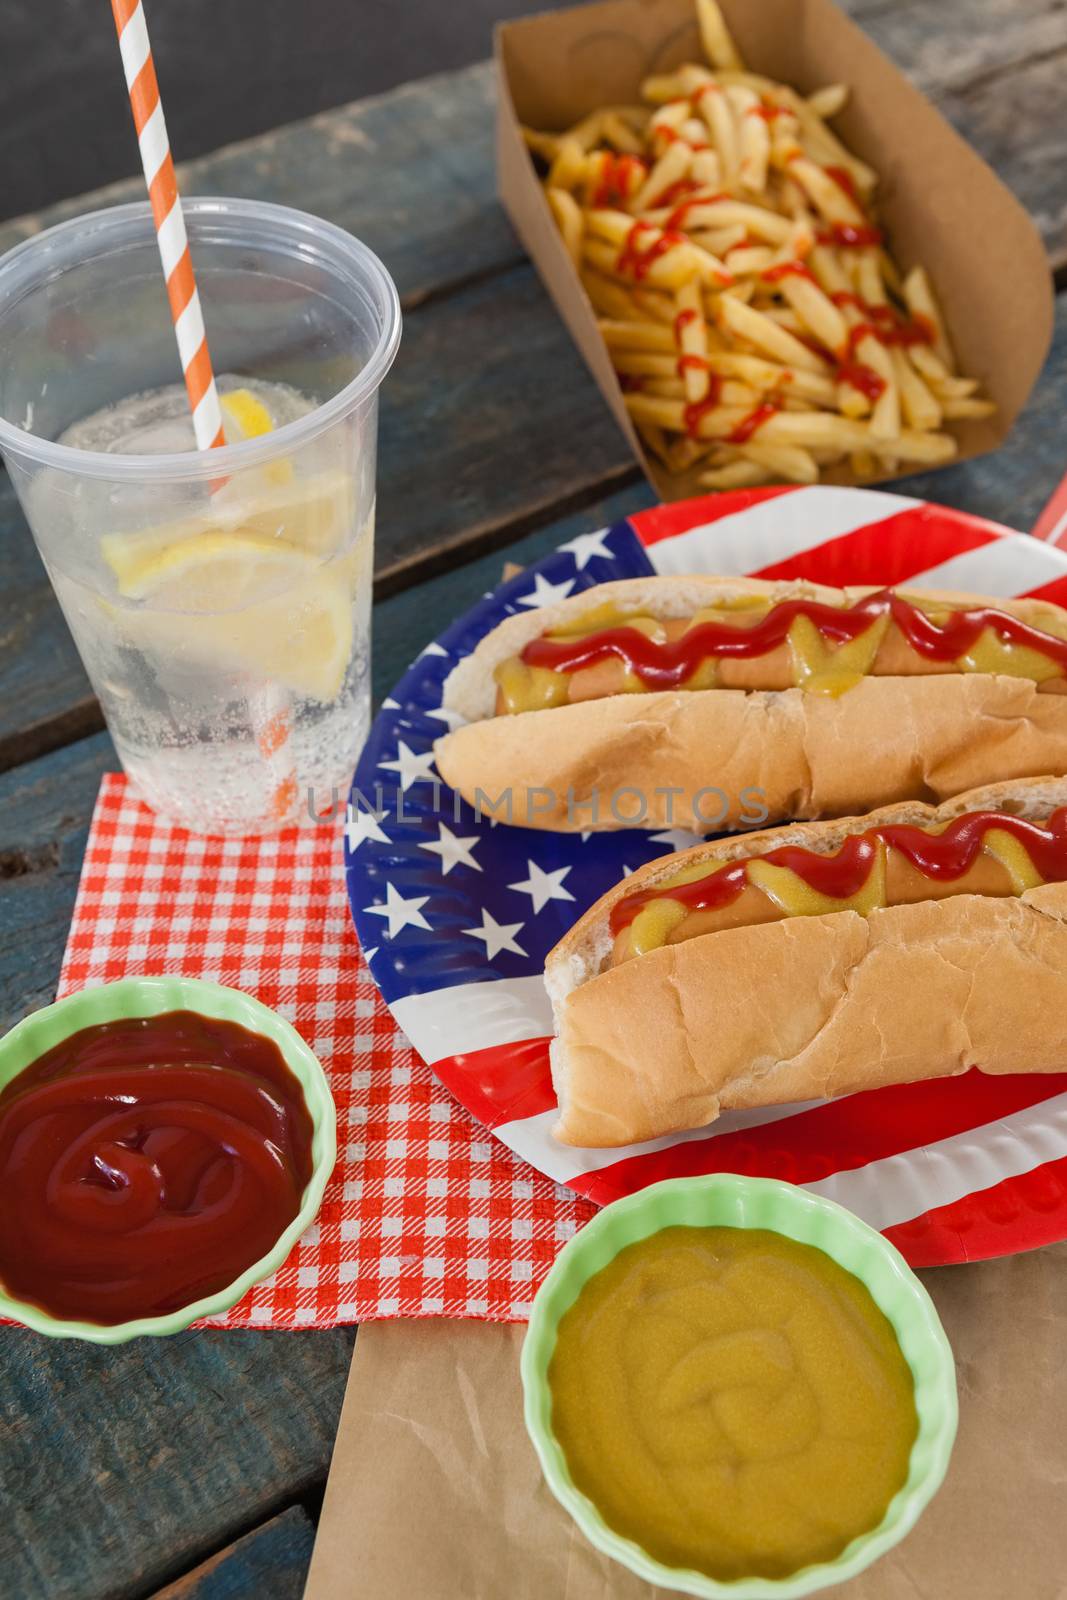 Hot dog served on plate with french fries by Wavebreakmedia